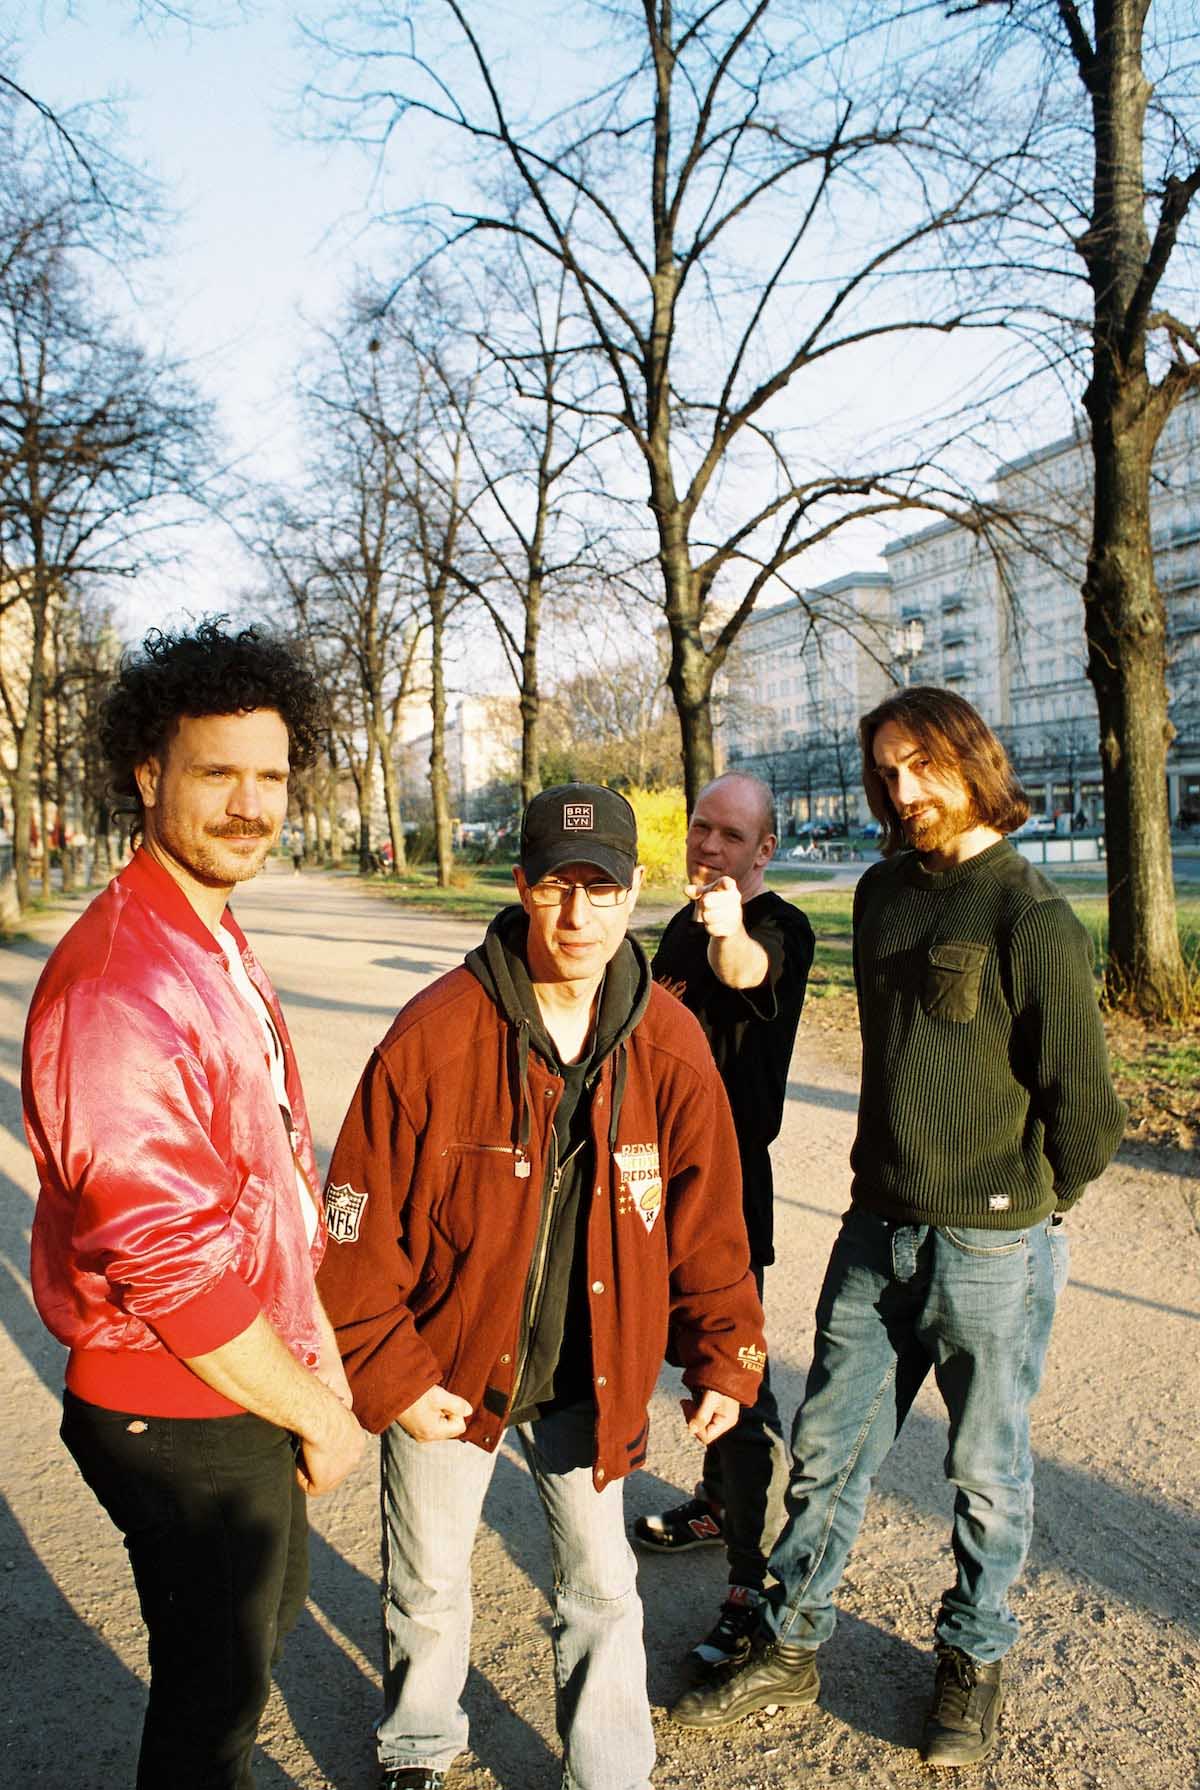 The members of the band Wellen.Brecher - four white men - are standing next to each other on a wide dirt footpath avenue, the trees are bare, multi-storey apartment buildings can be seen in the background. The one on the left has longer black curly hair, a moustache and wears a shimmering red blouson and black jeans. The one next to him has glasses and a black baseball cap on, wears a black hoodie, light jeans and a dark red NFL jacket. He looks into the camera. The one slightly behind him is pointing his finger at the camera, he has little hair and is dressed all in black. The one on the far right has chin-length brown hair, a full beard, a dark green coarse jumper, blue jeans and black shoes.